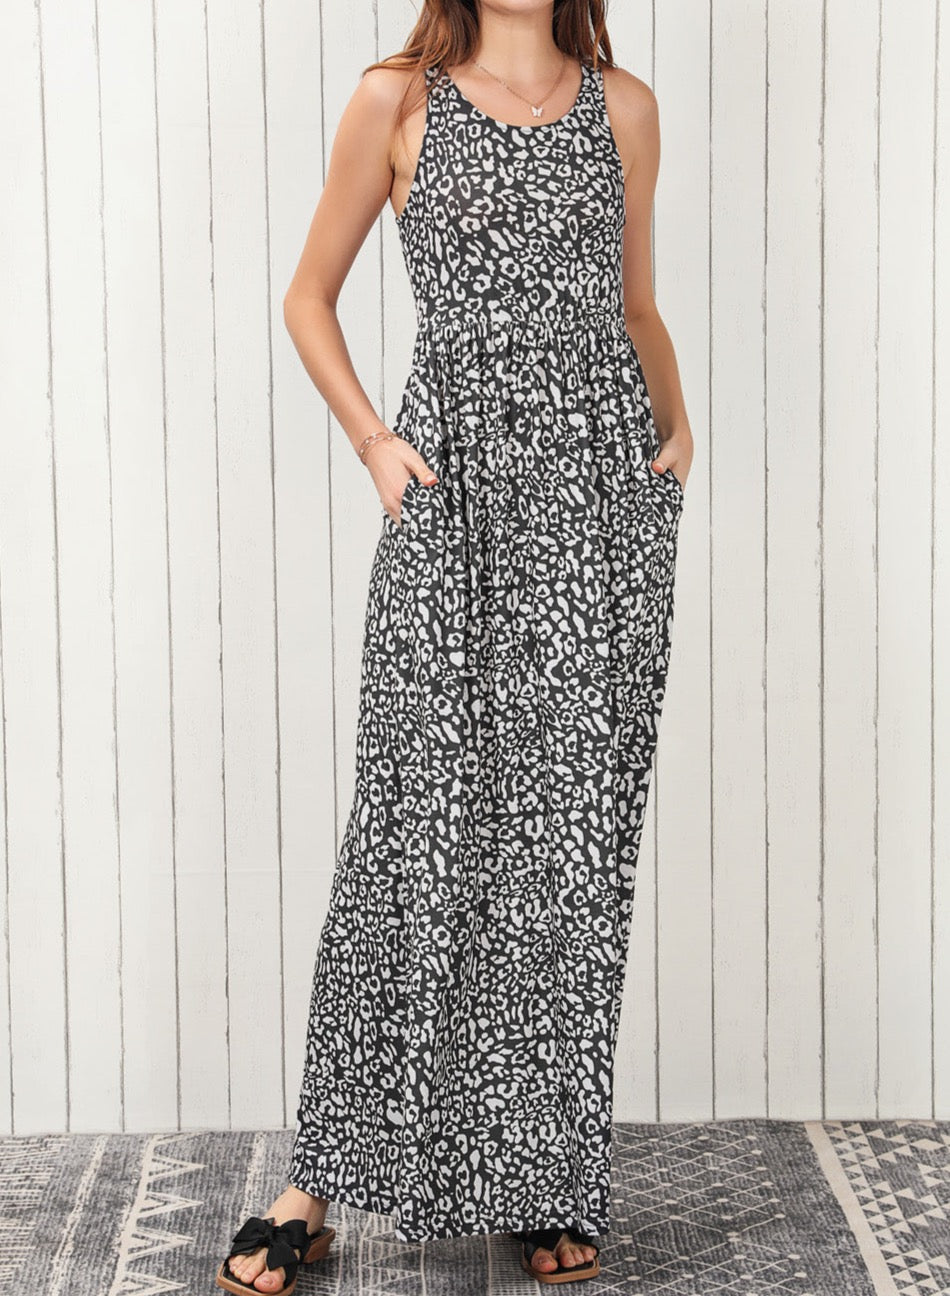 Sunday Stroll Leopard Maxi Dress - Cheeky Chic Boutique